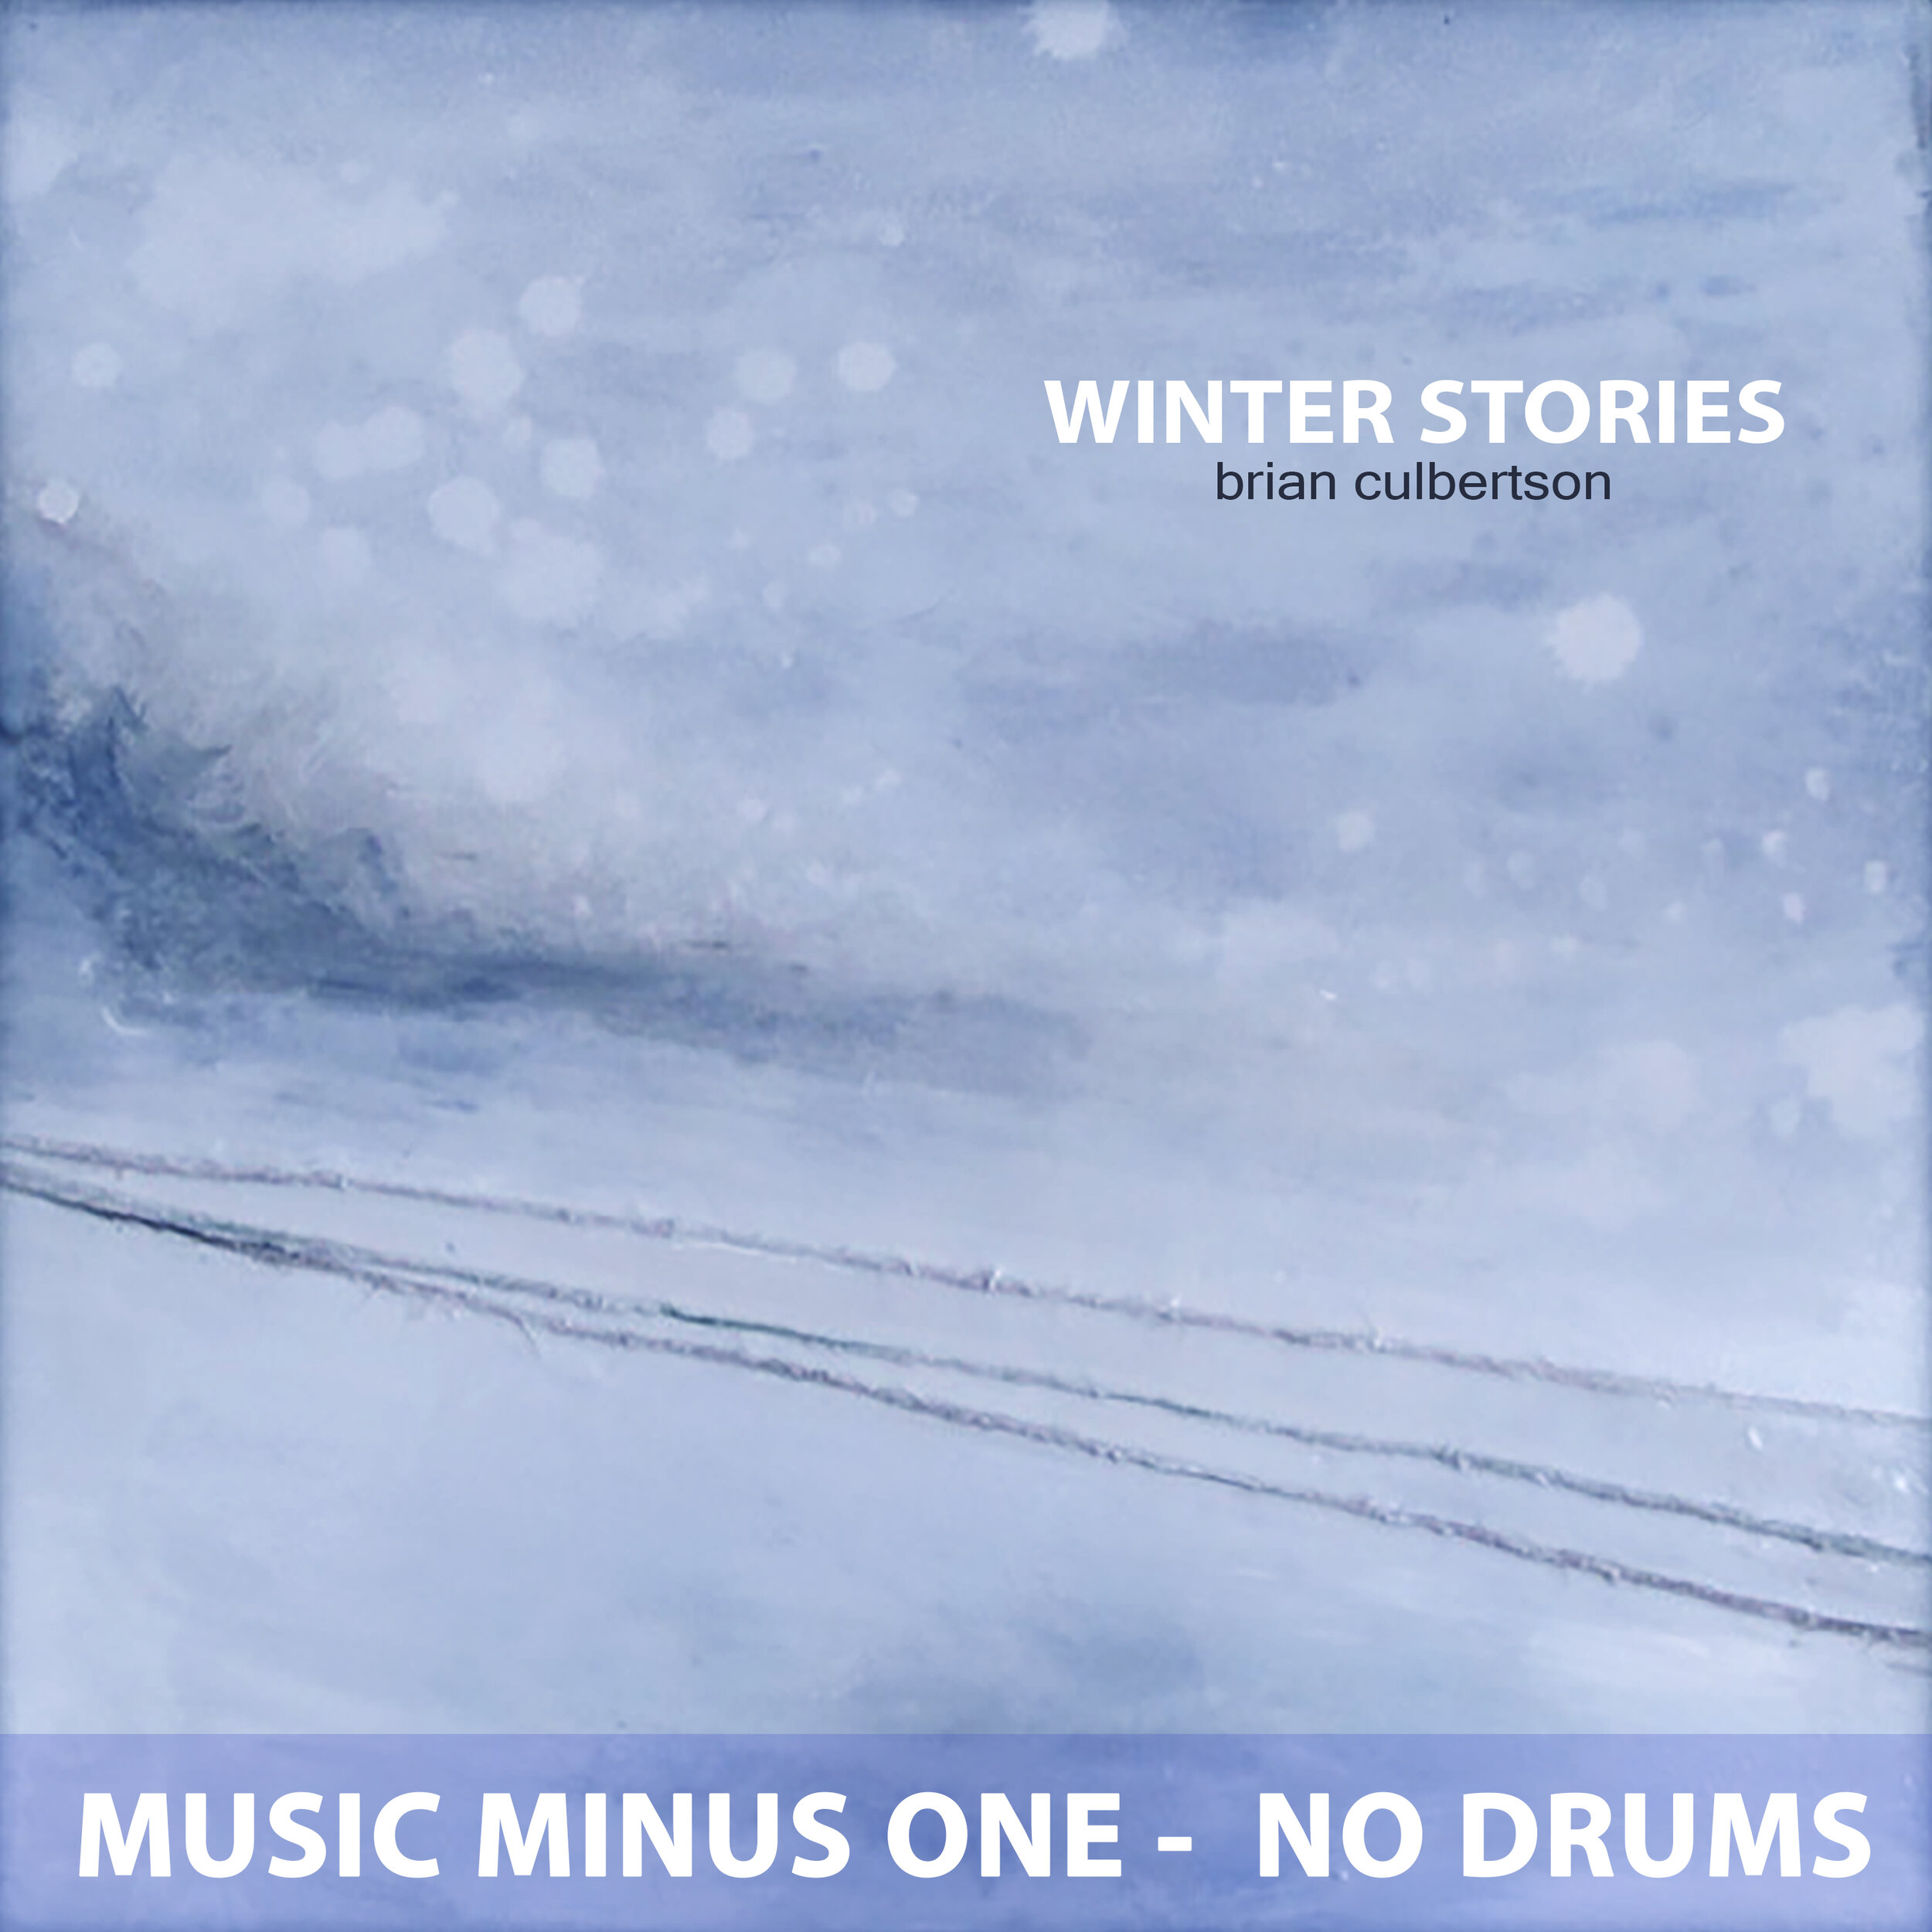 Winter Stories Cover NO DRUMS.jpg